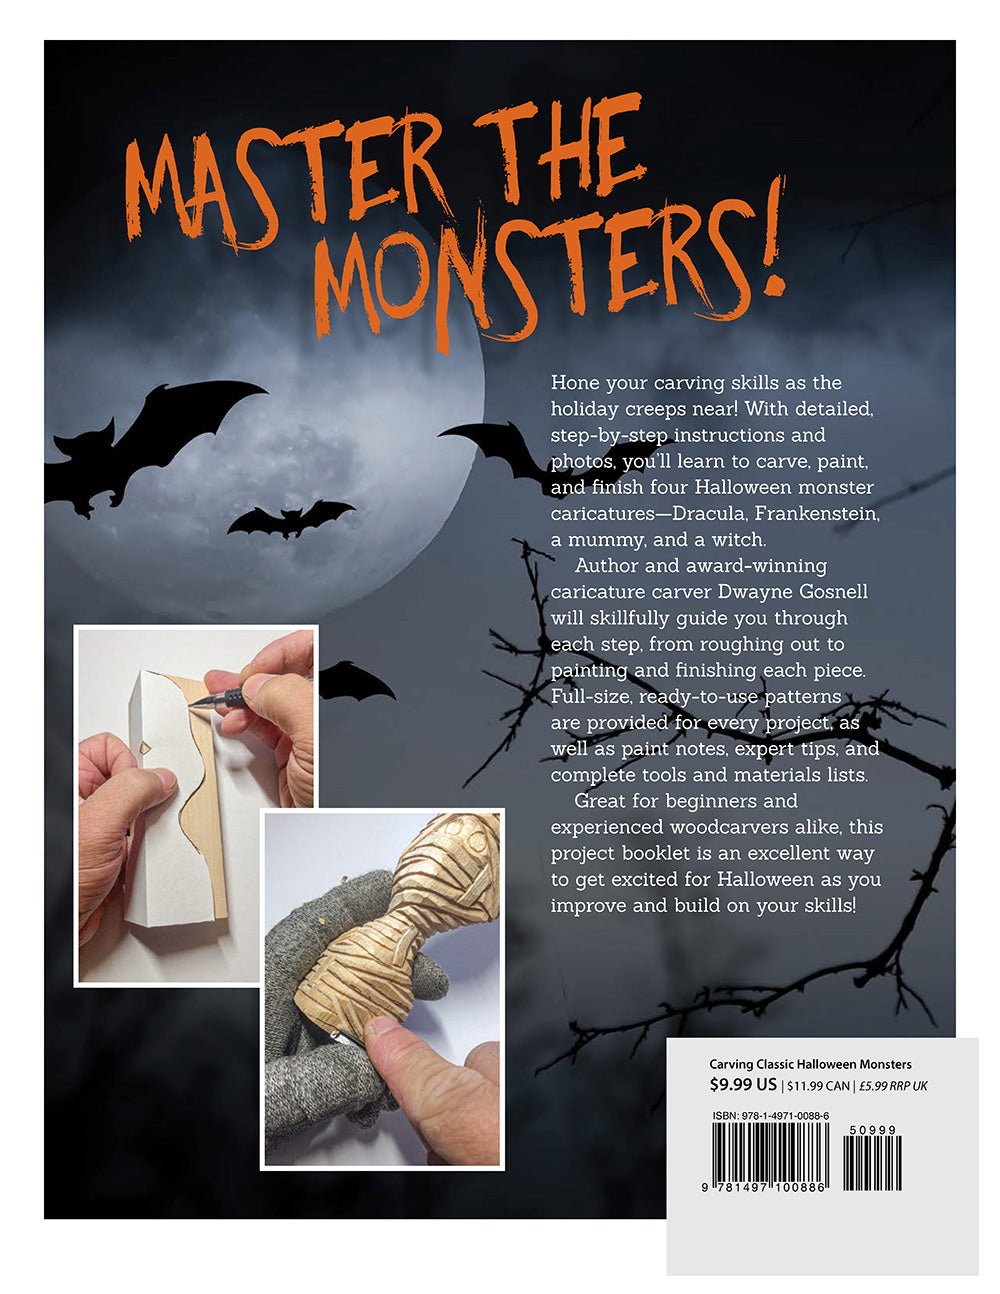 Carving Classic Halloween Monsters